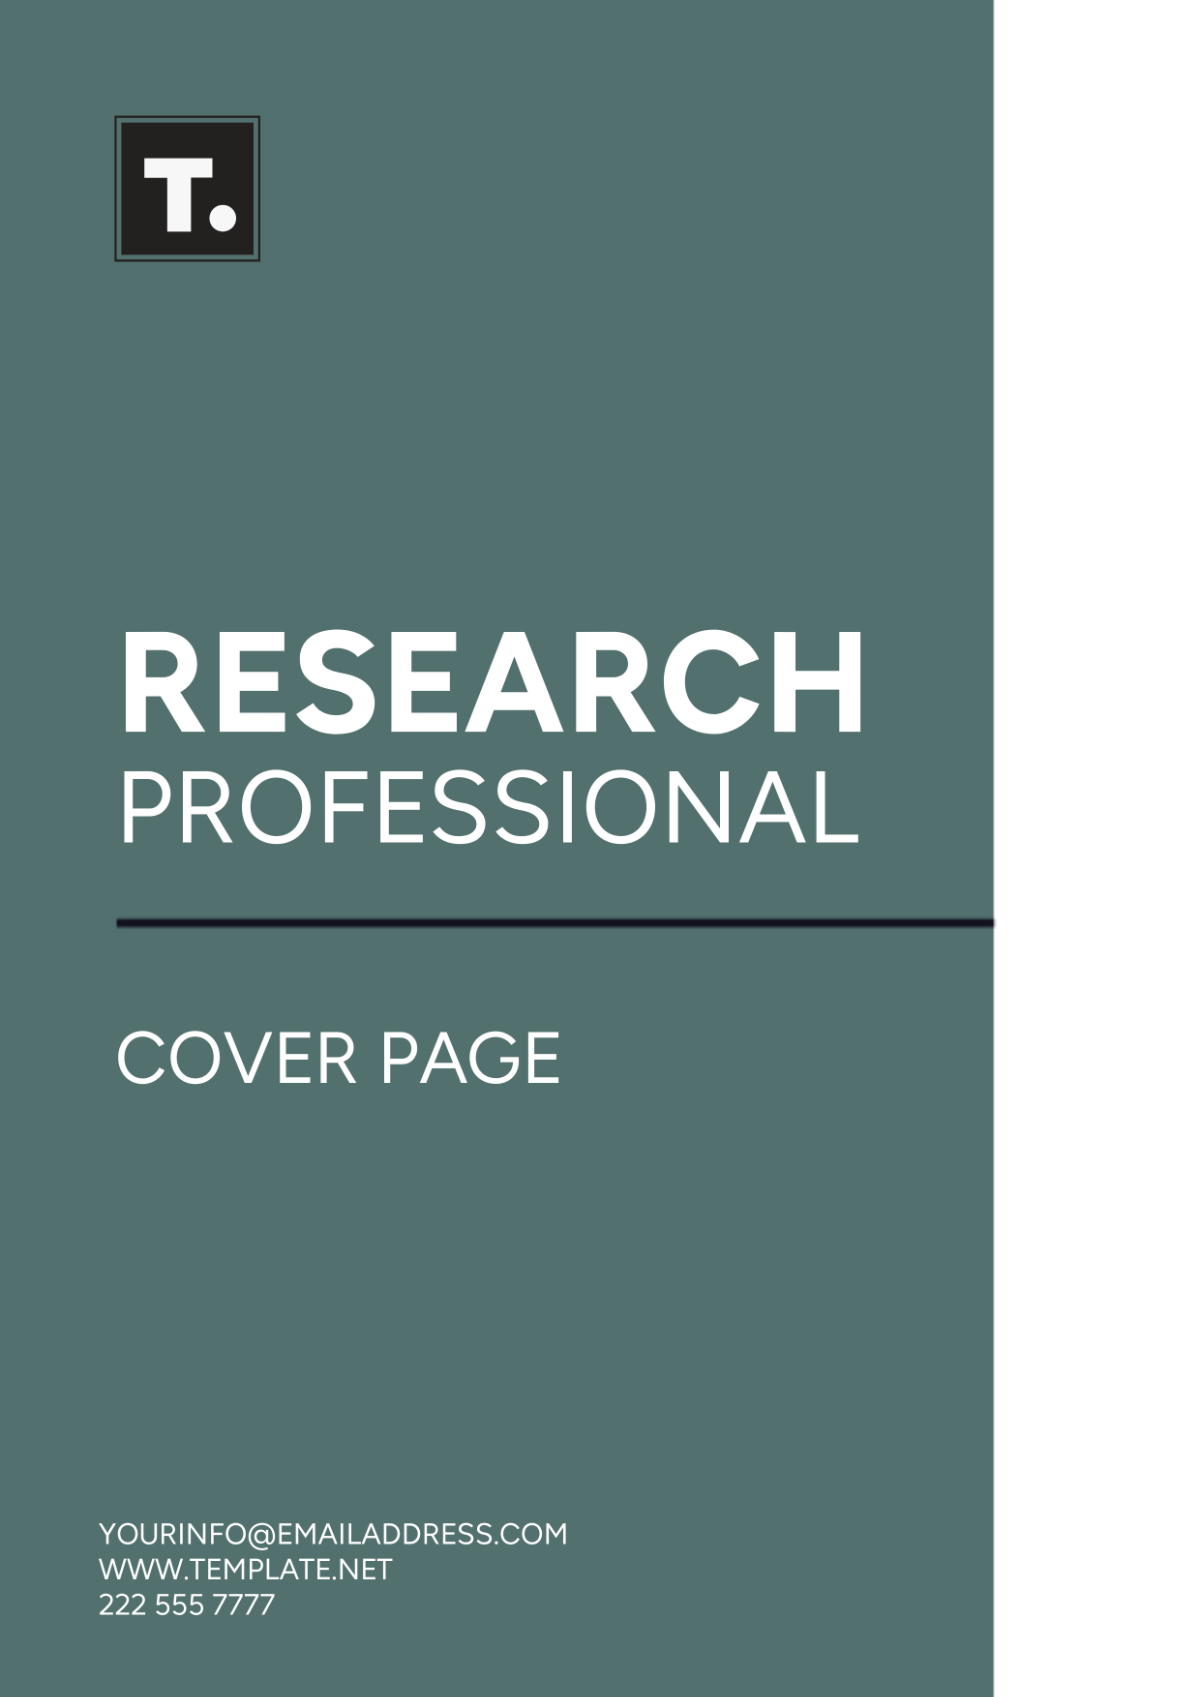 Free Research Professional Cover Page Template